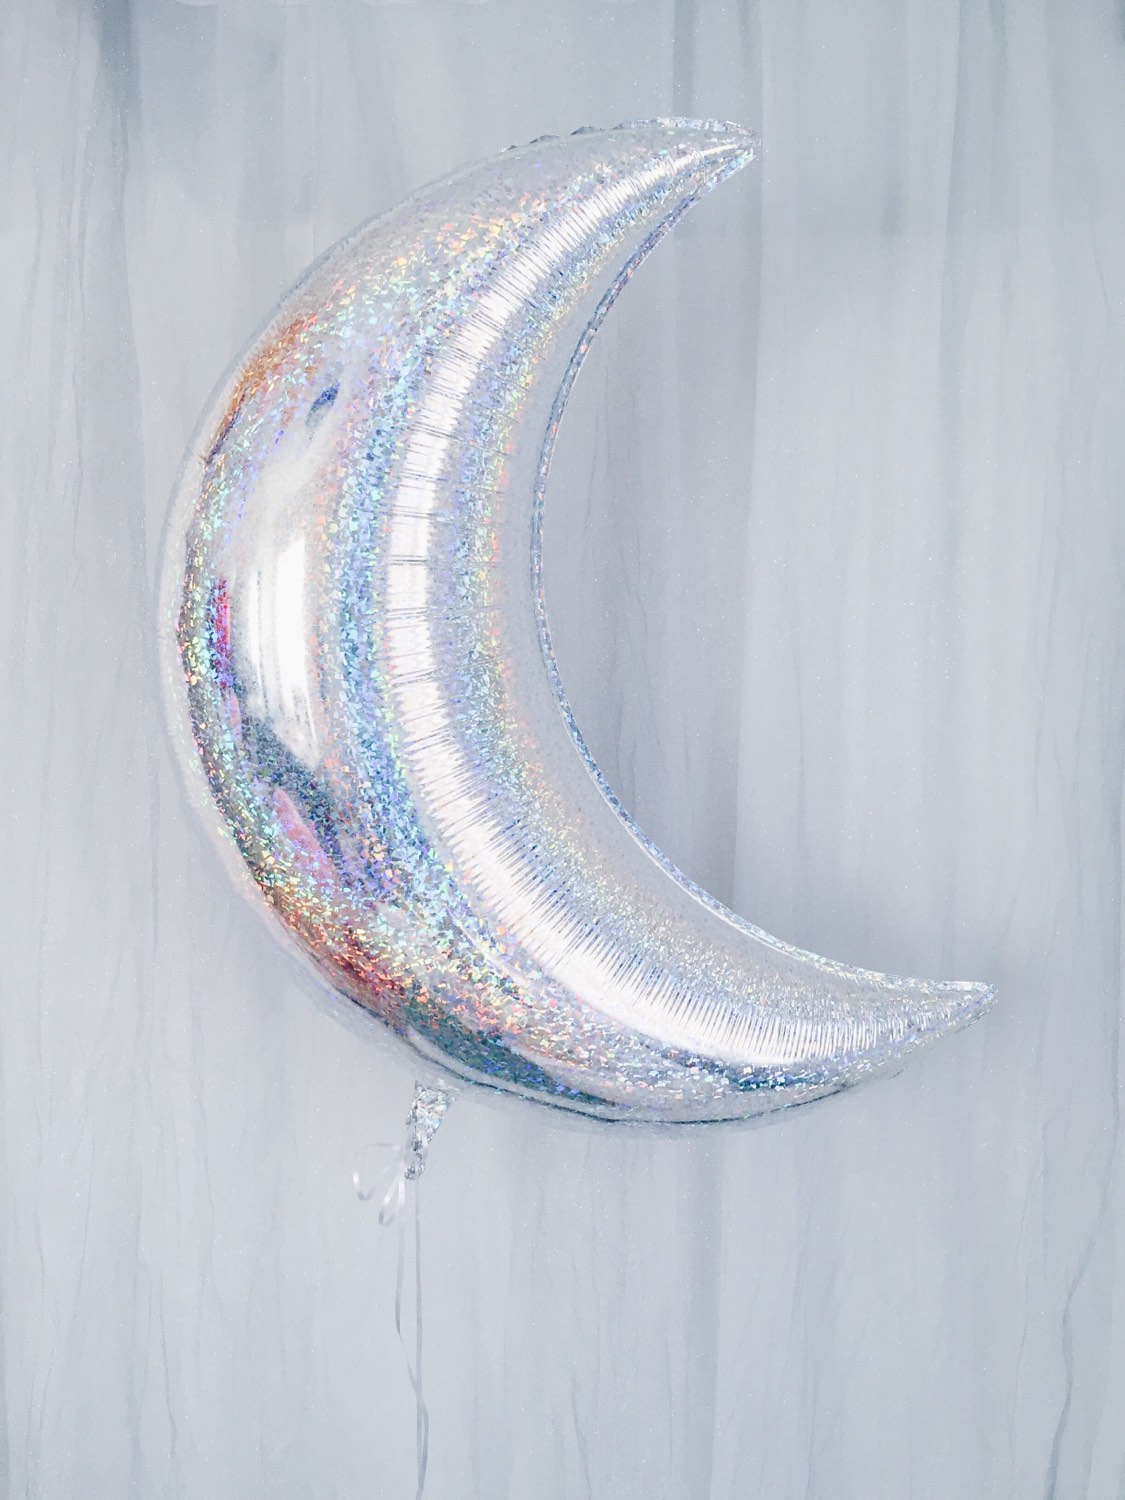 Holographic mylar balloon from Etsy shop Oh Shiny Paper Co.